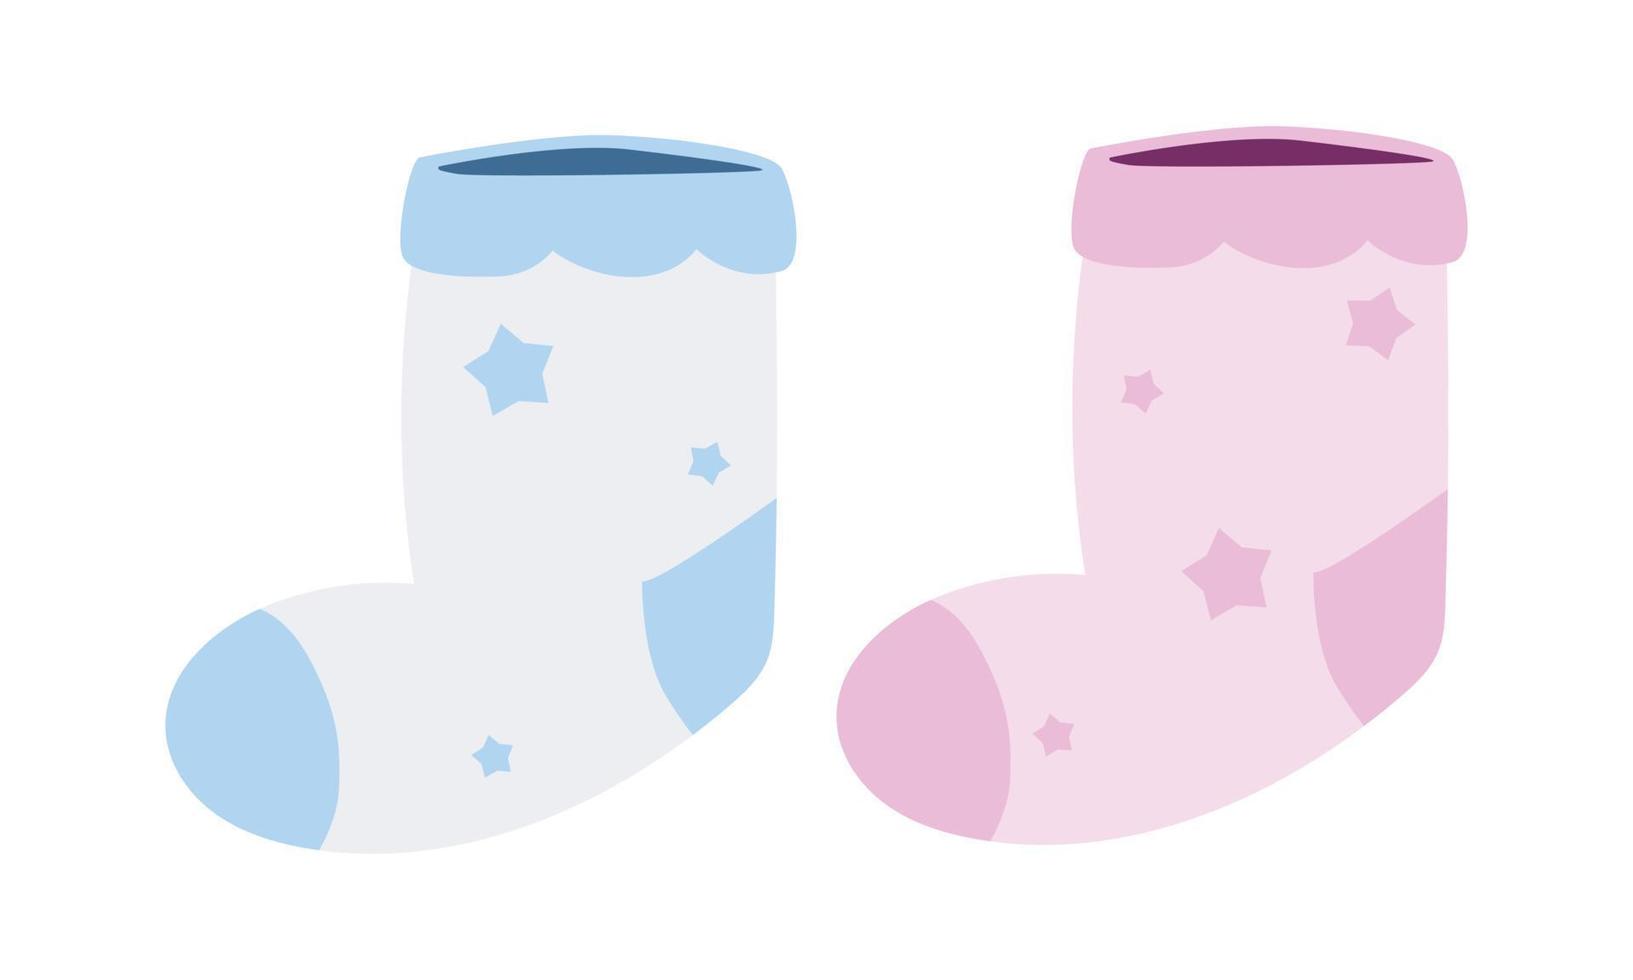 Set of blue and pink baby socks clipart. Simple cute newborn baby sock flat vector illustration. Toddler sock for baby shower or birthday party invitation cartoon style icon. Twins arrival concept